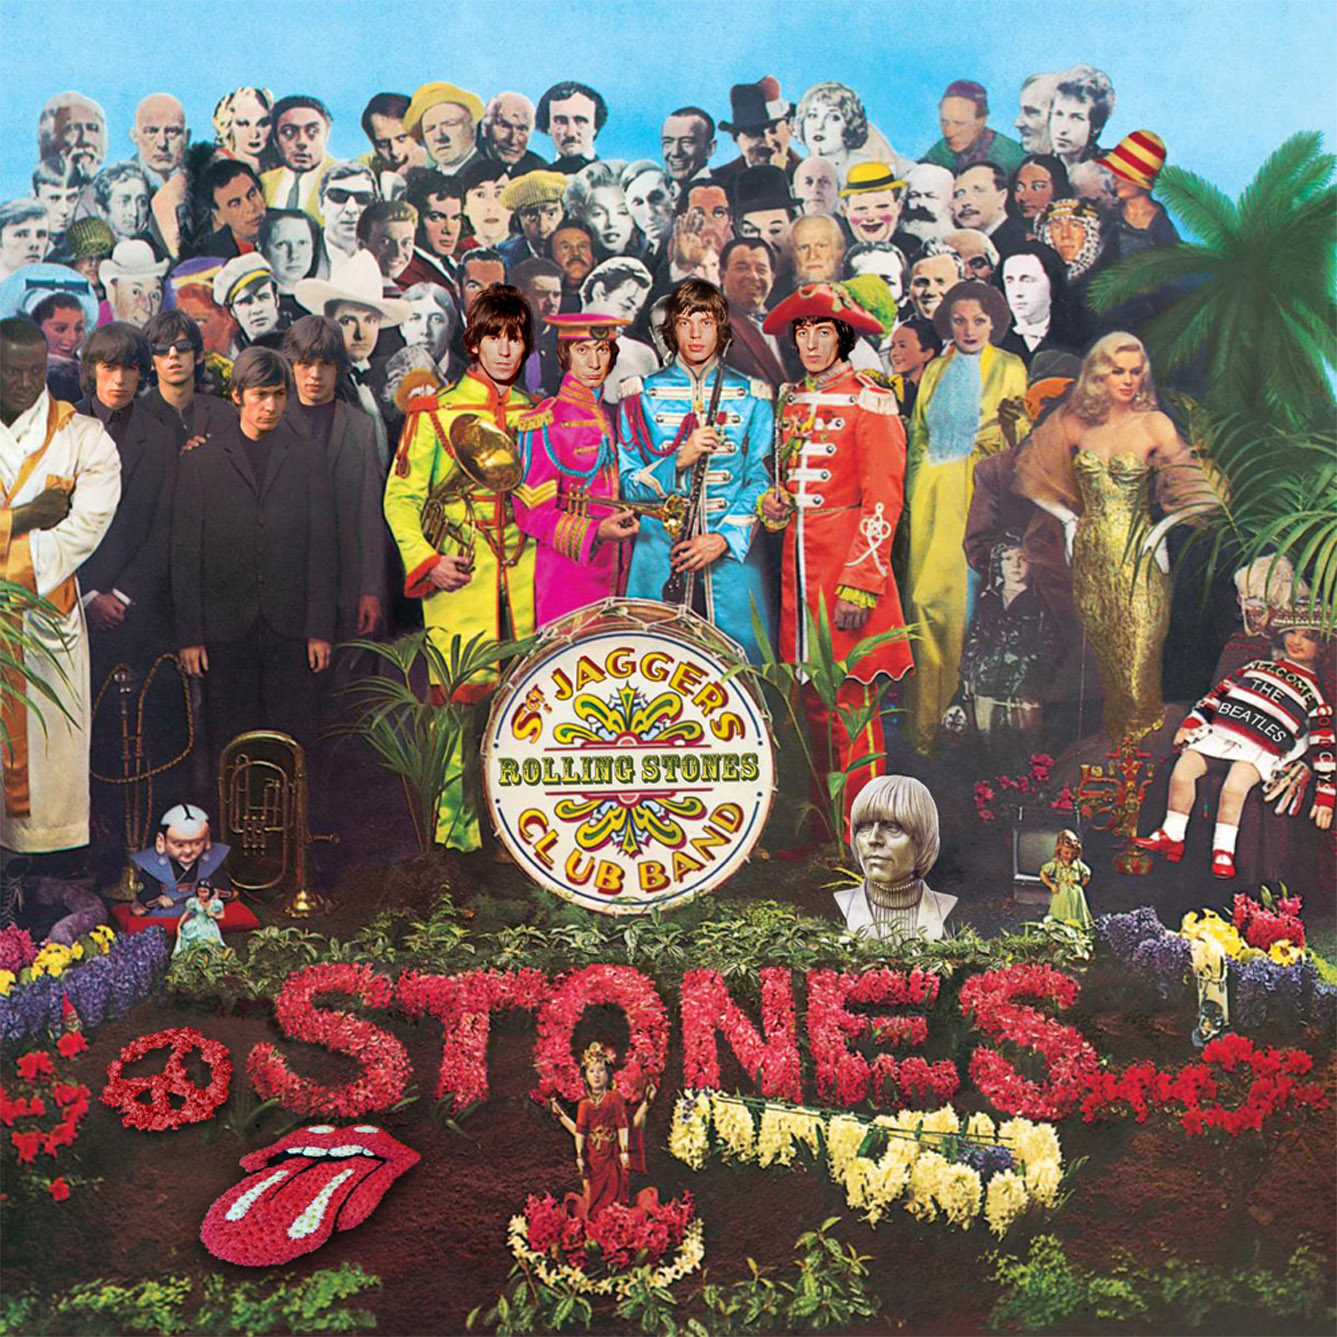 Album cover parody of Sgt. Pepper's Lonely Hearts Club Band (Remastered) by The Beatles